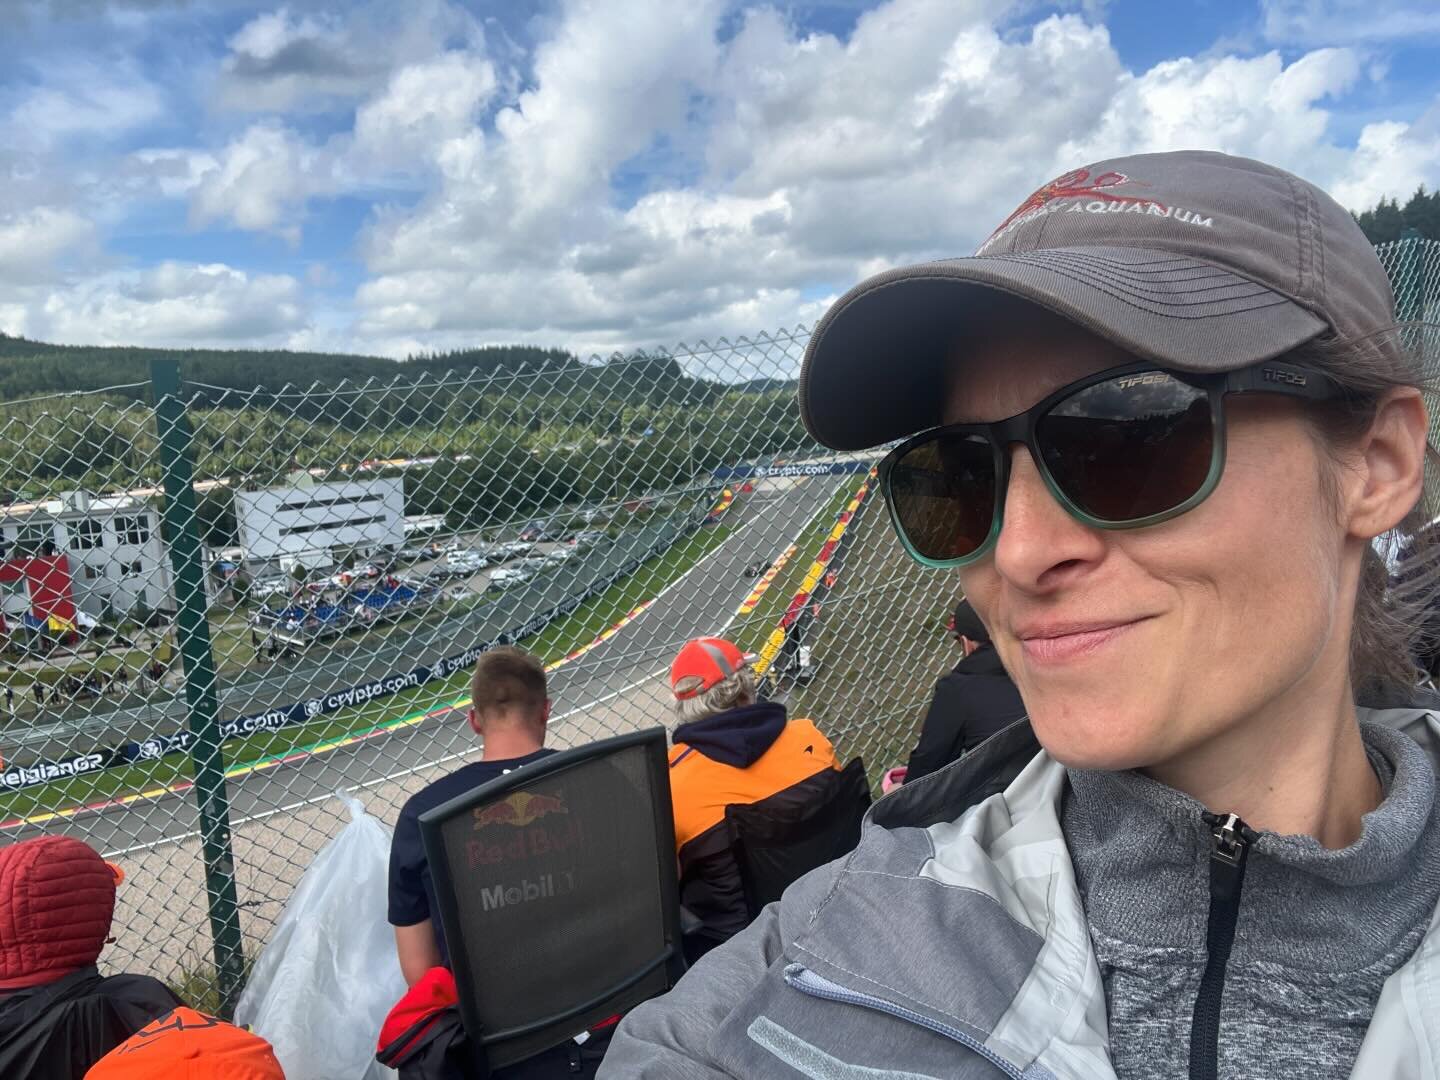 A very late post to share a few moments from when we went to the Belgian GP last year!! 🇧🇪 🏎️🌧️🌈🌞
F1 fans endure just about any weather&hellip; including us! despite the daily downpours we biked to the track everyday, and even made a little rai